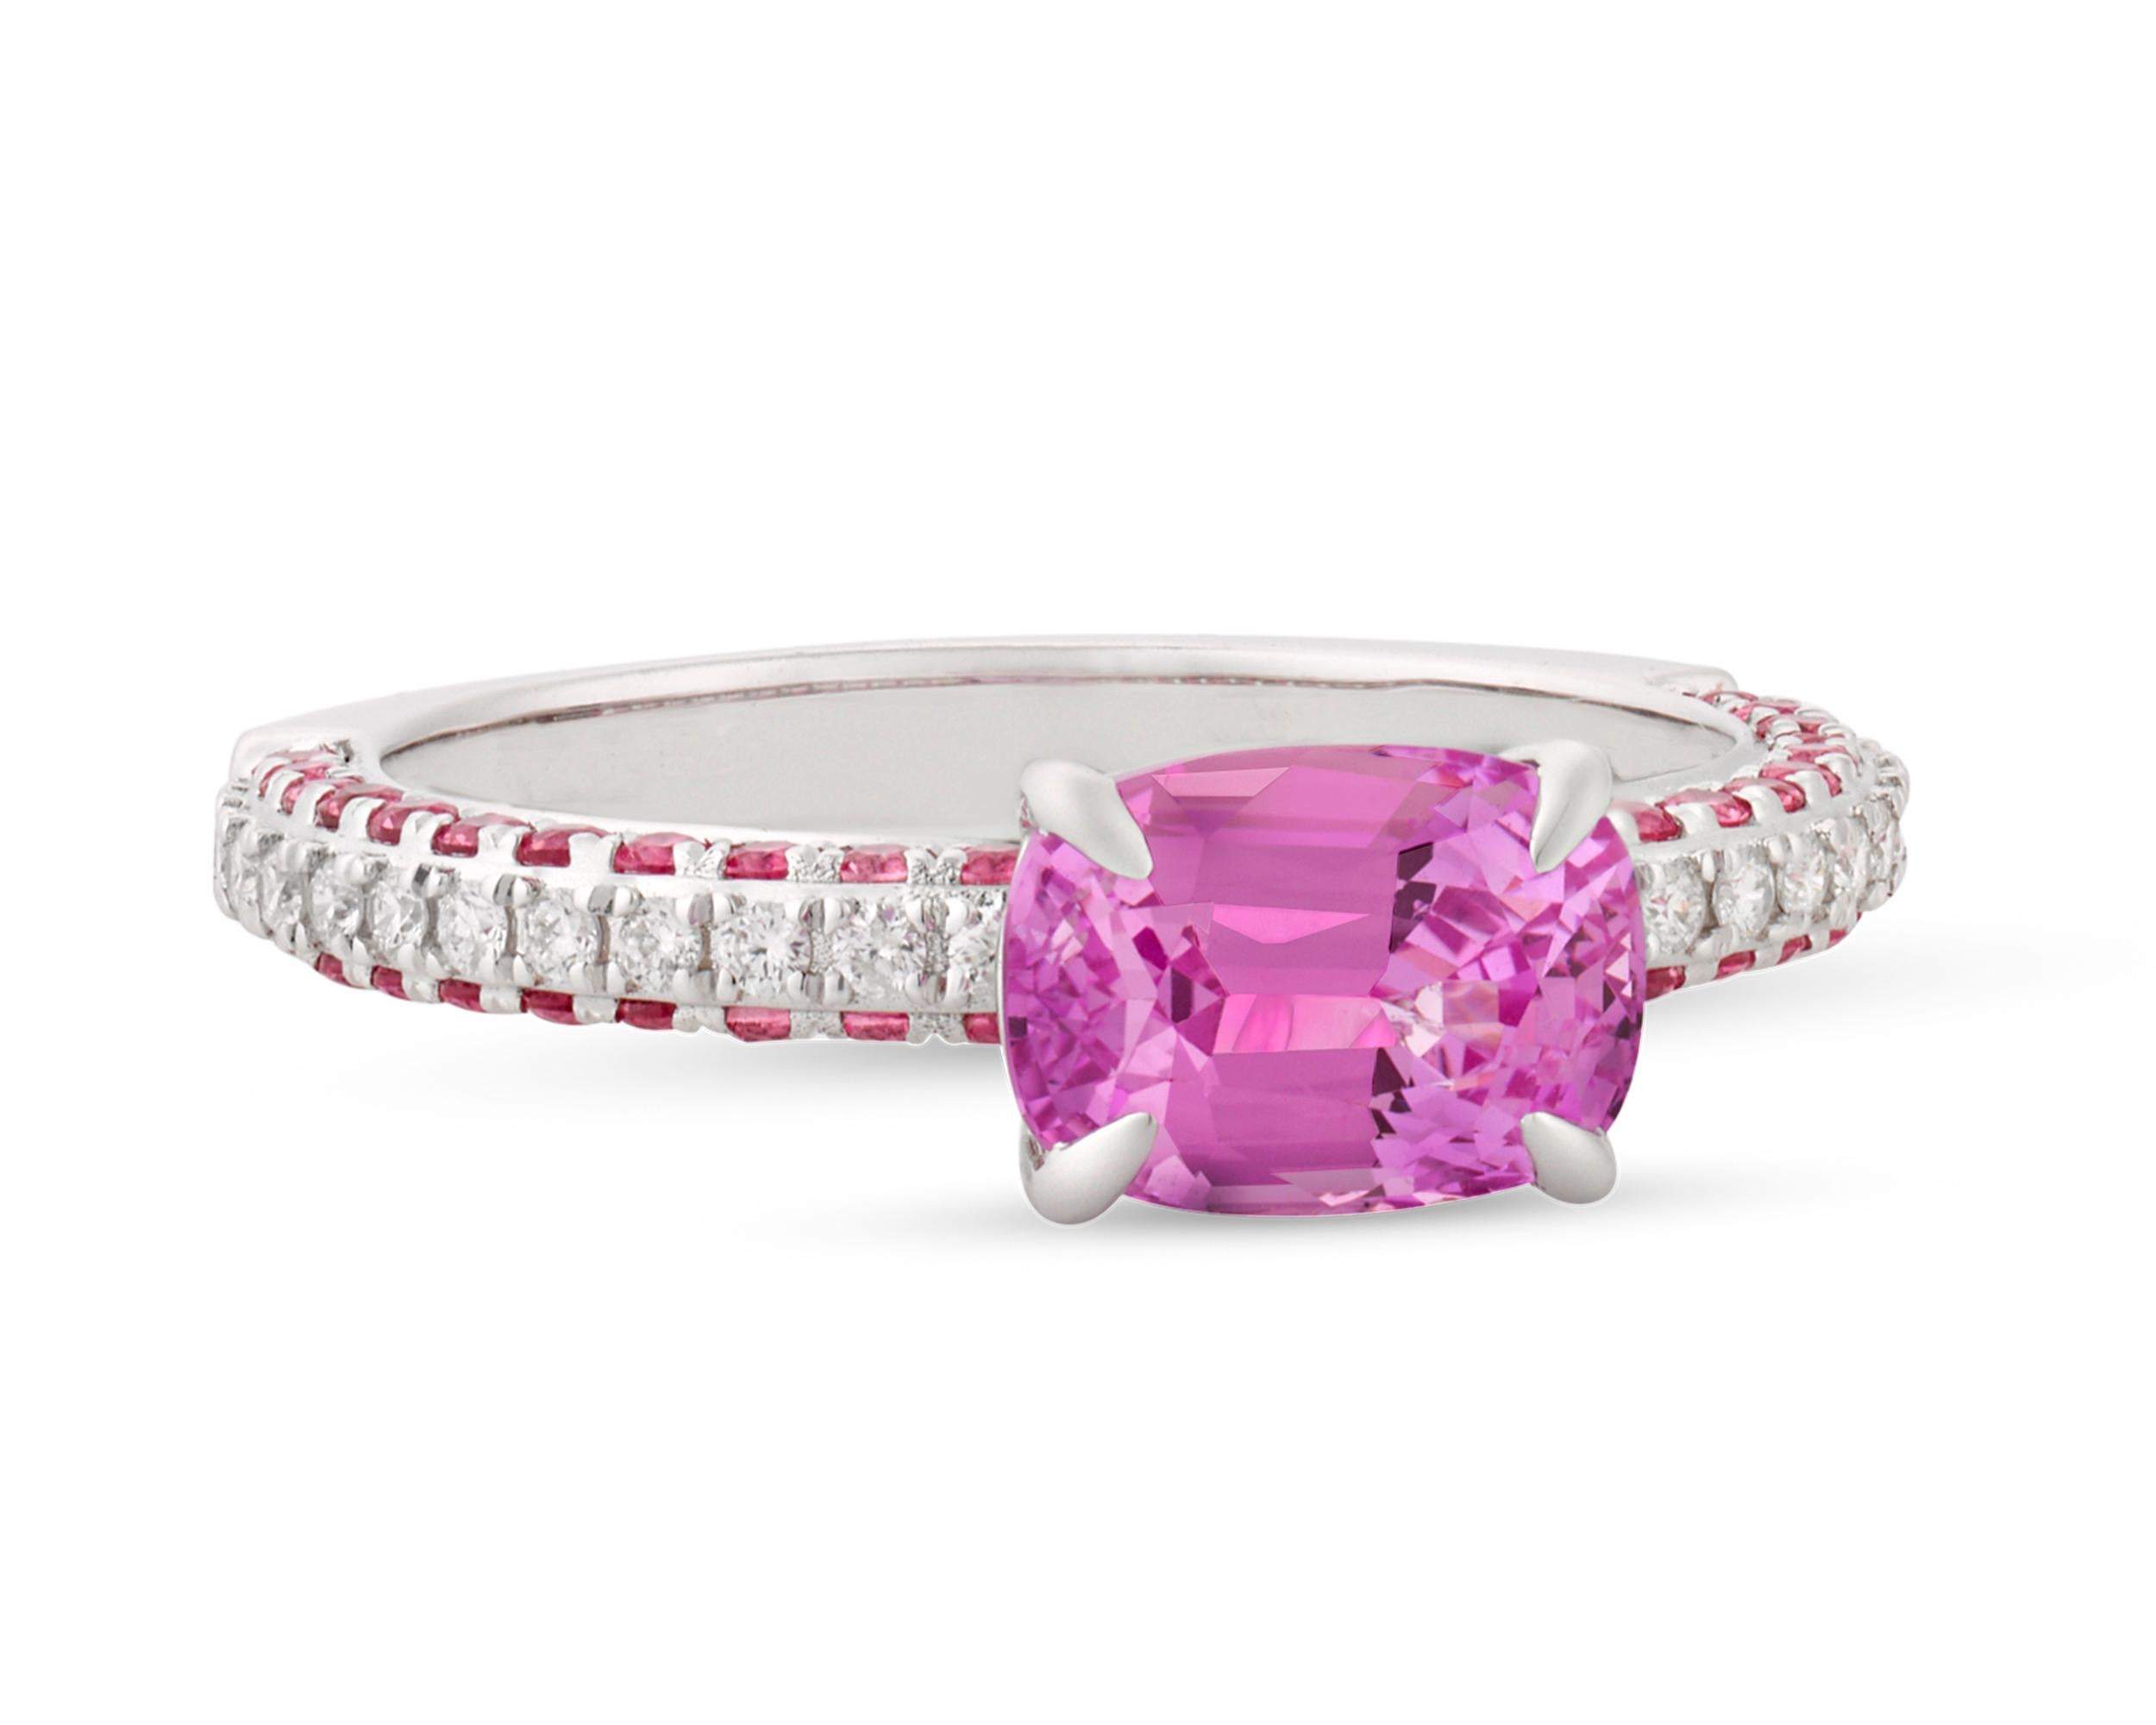 The 2.19-carat untreated pink sapphire in this ring exhibits a distinctive, saturated pink hue, among the rarest and most valuable colors in which to find one of these stones. This cushion-shaped gem is certified by Lotus Gold as a no-heat pink